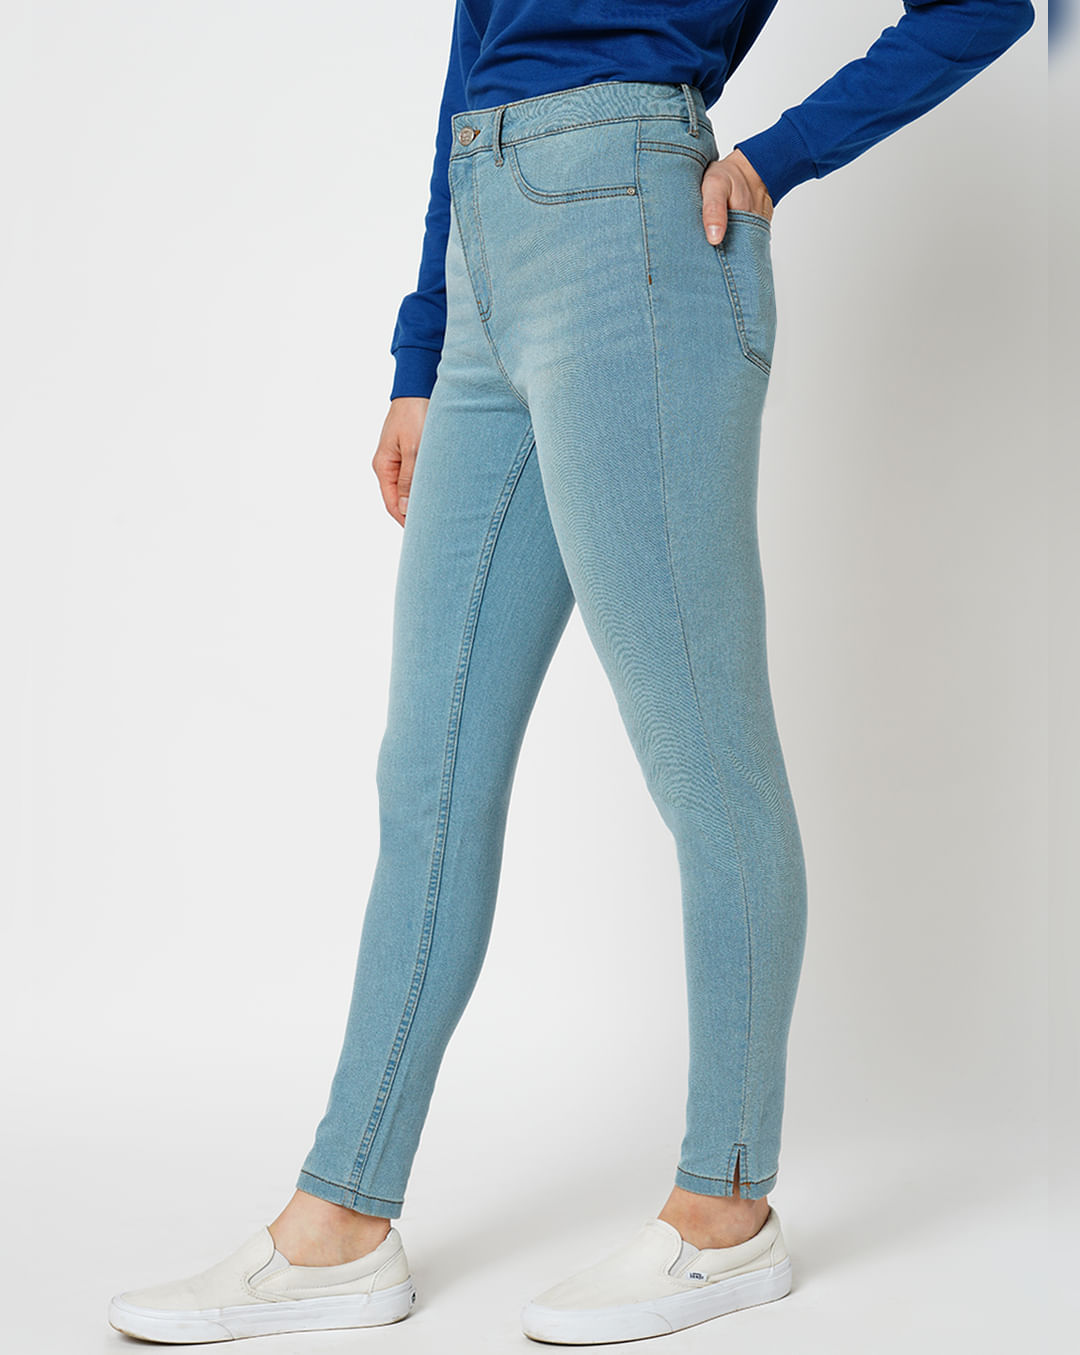 JDY by ONLY Light Blue High Rise Skinny Fit Jeggings